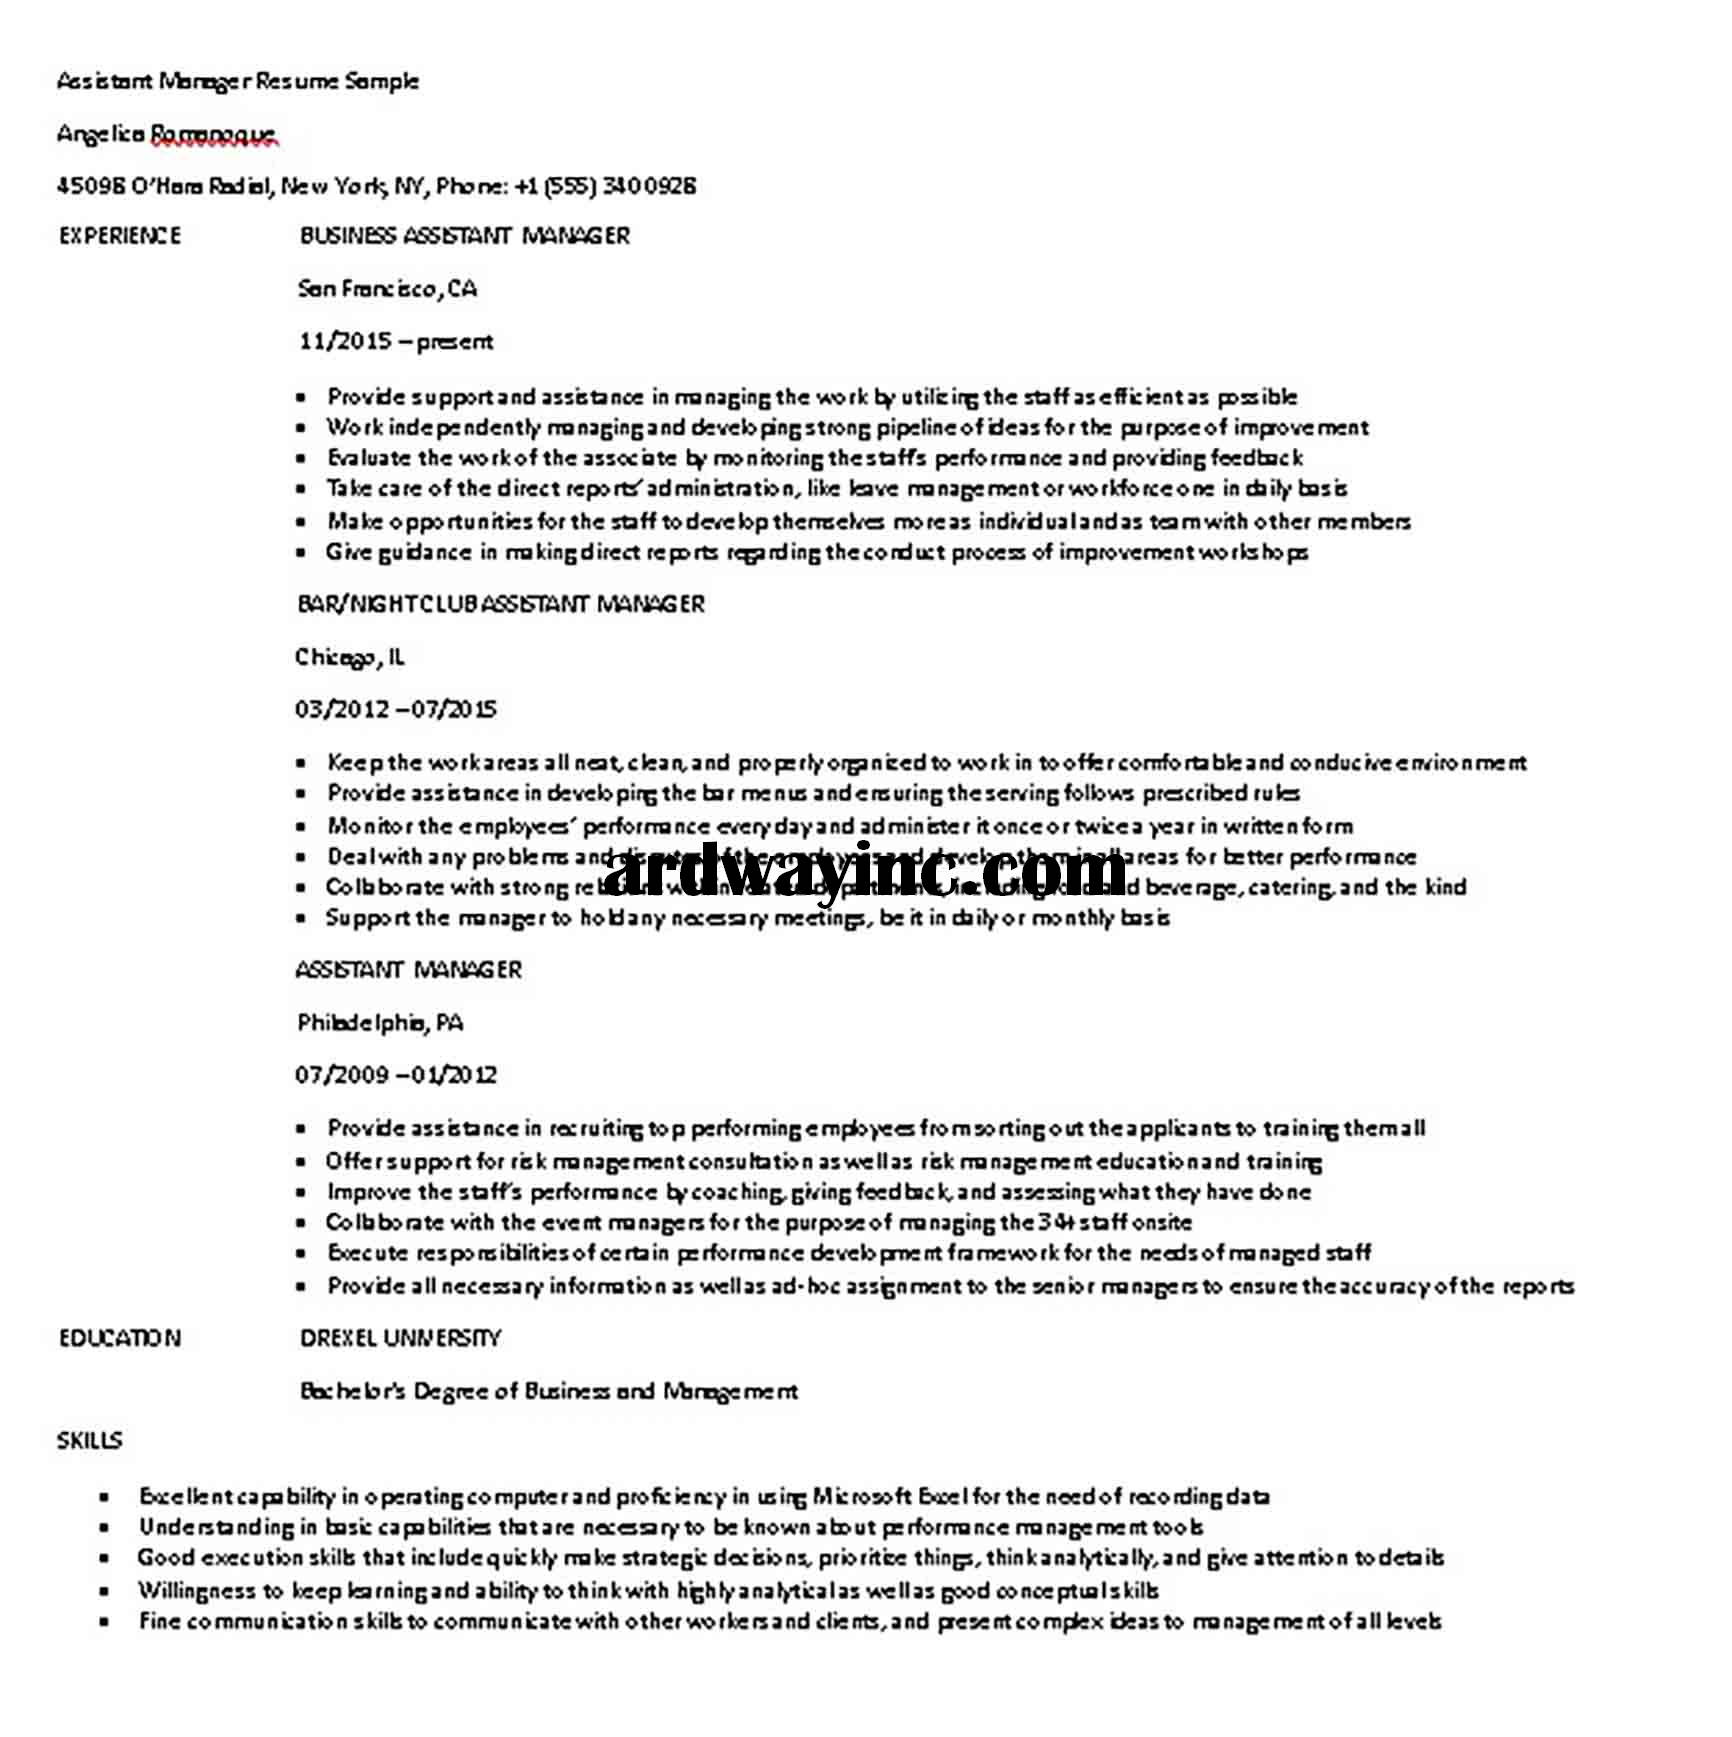 Assistant Manager Resume Sample 1